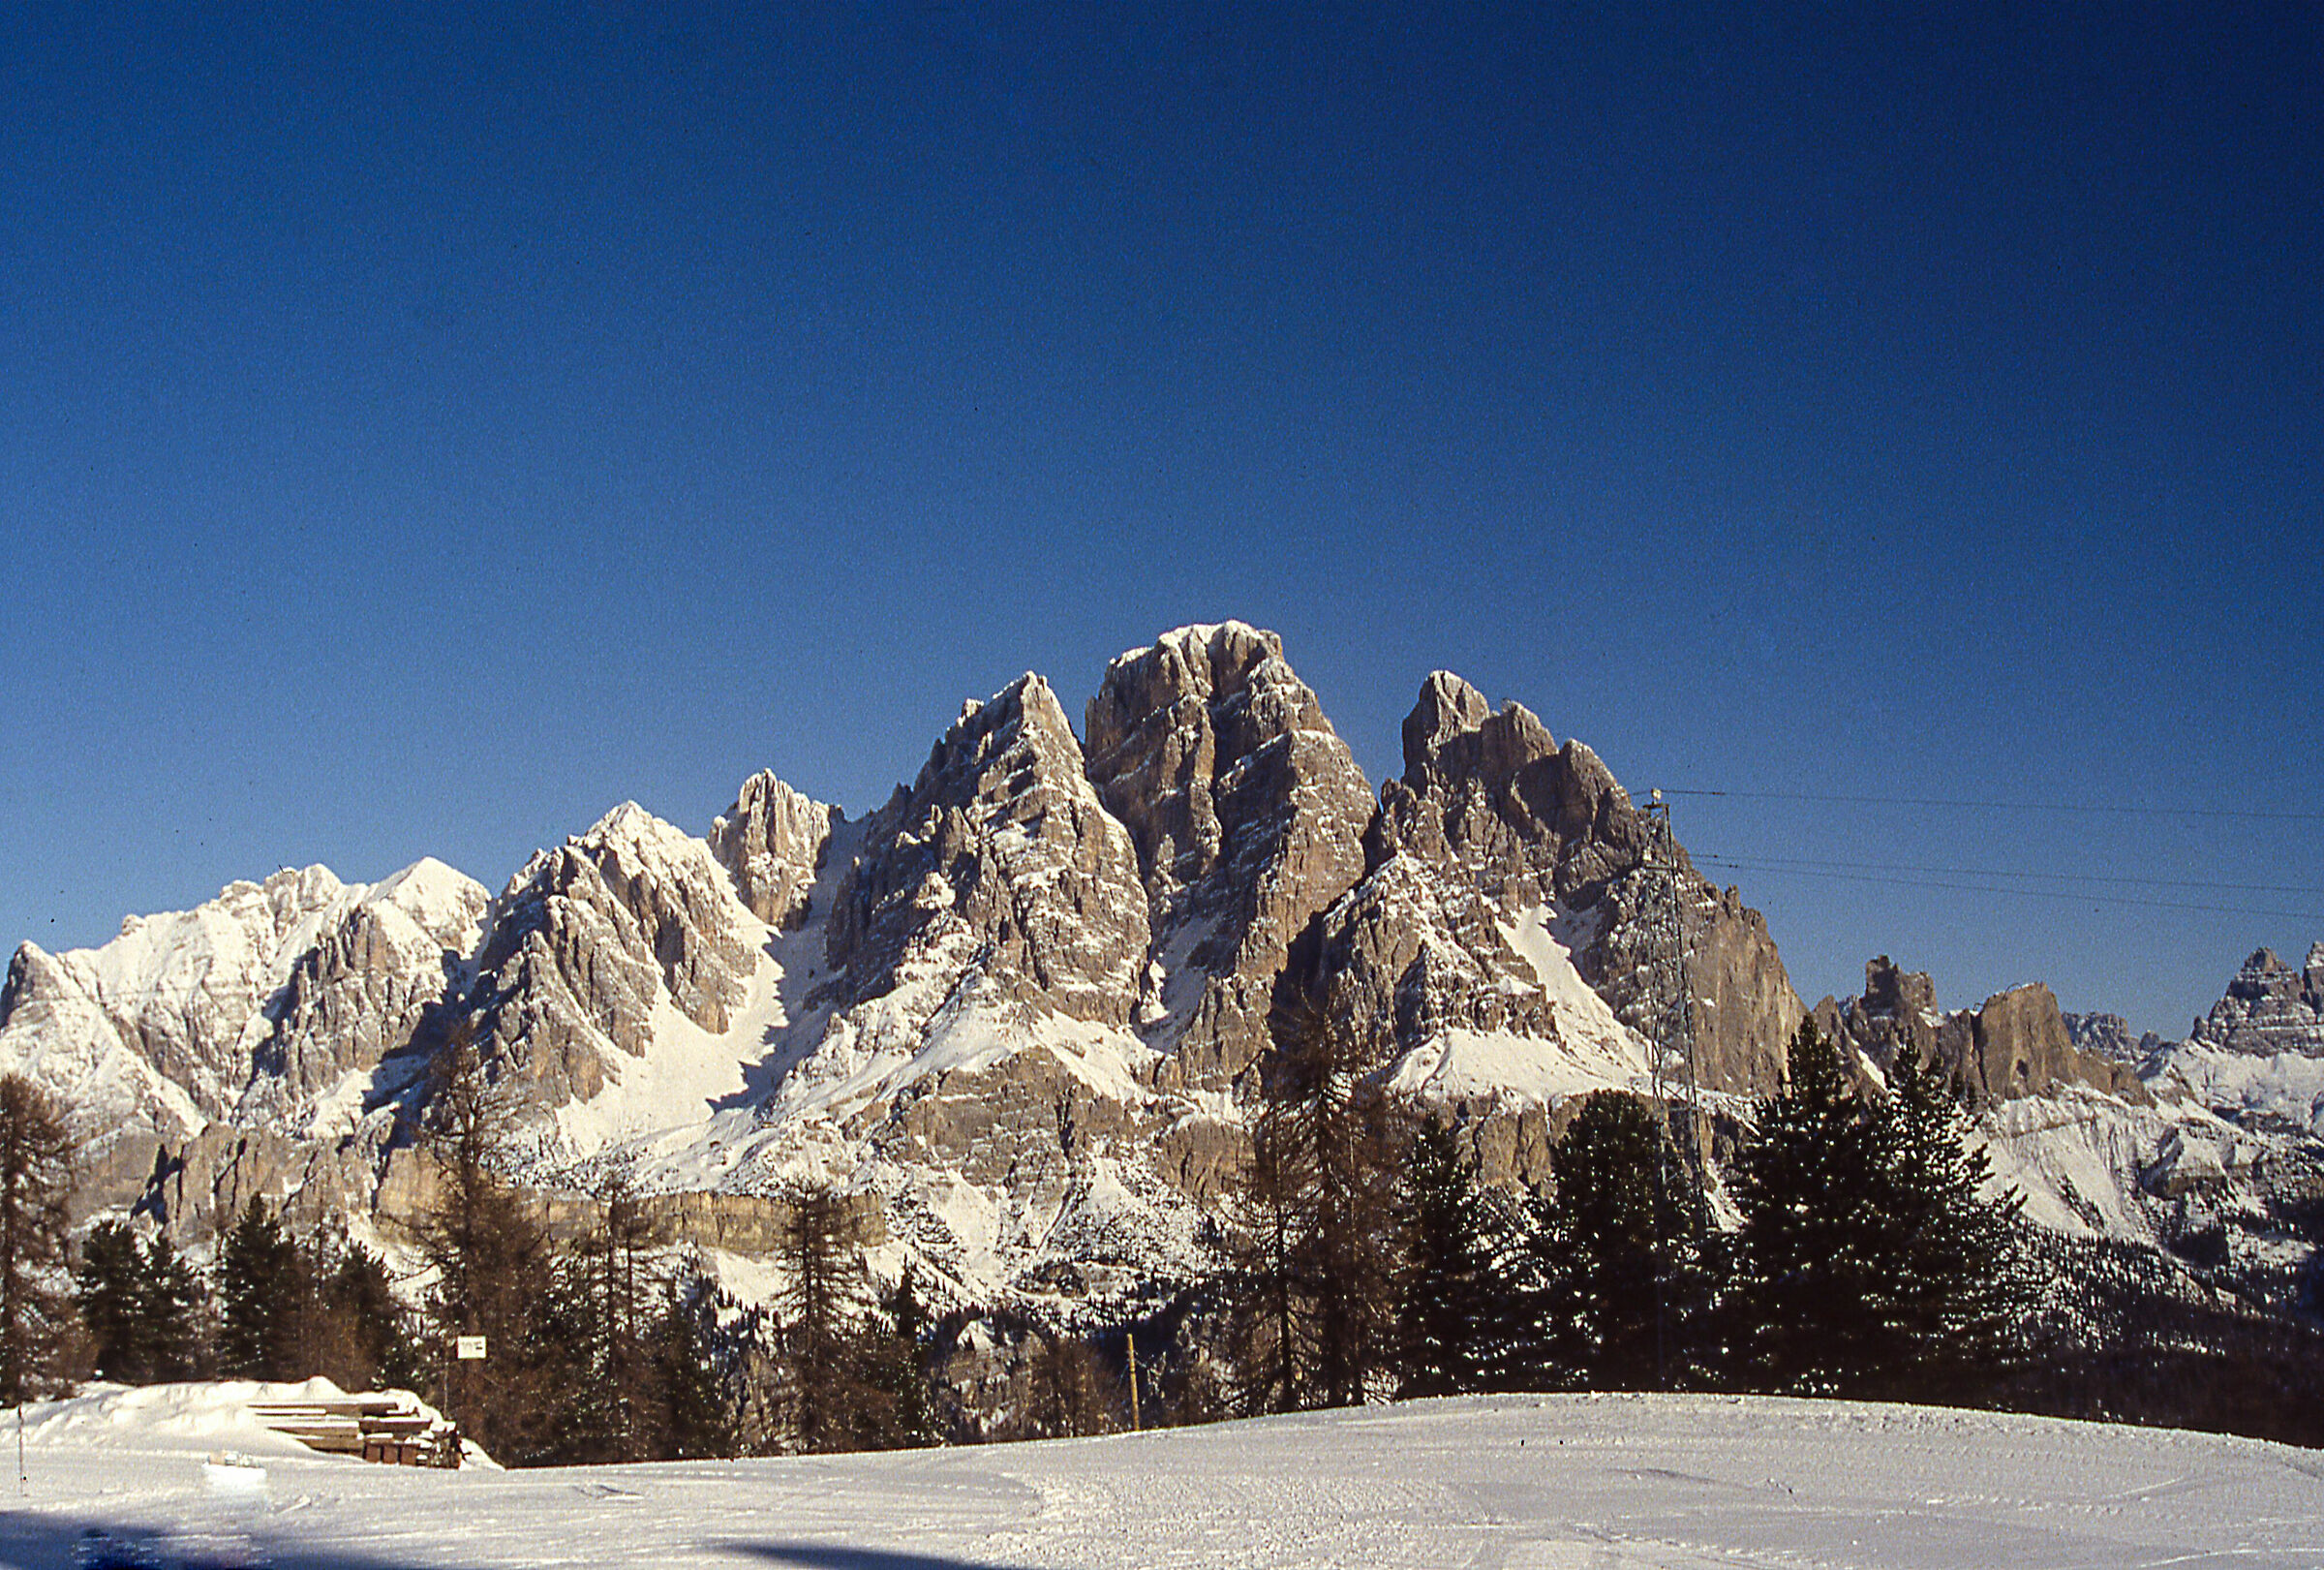 In the Valley of the Crystal of Cortina D'Ampezzo...